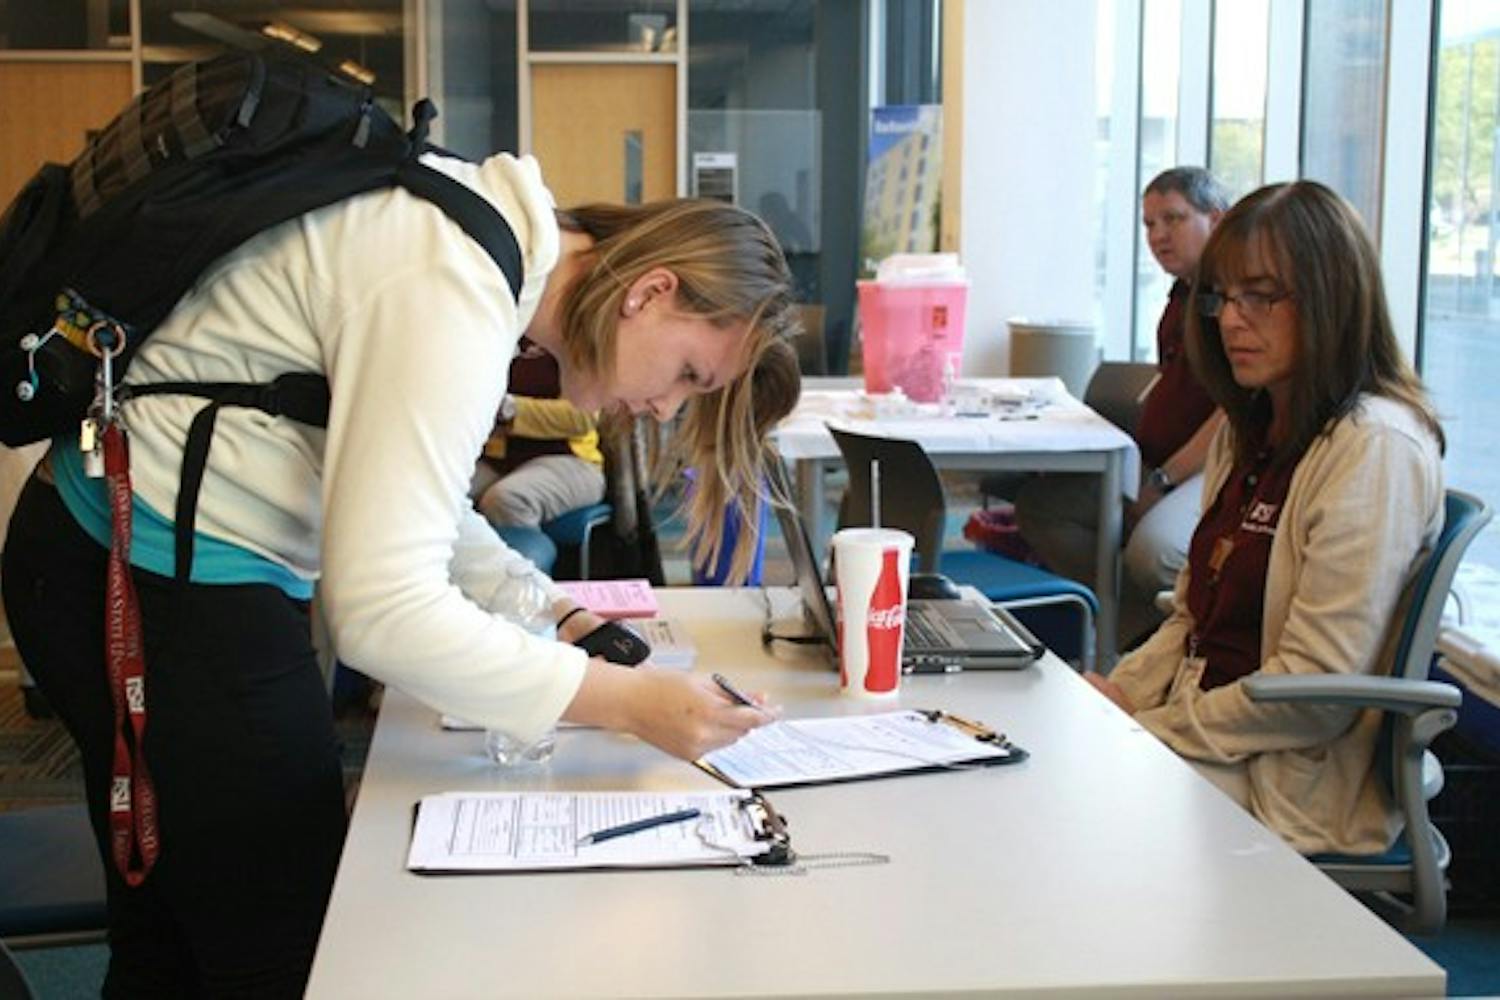 Katrece Swenson, a sophomore studying biological science attended the ASU Health Services Flu Clinic to get her shot for the season. As a peer mentor living in the dorms, she wants avoid if at all possible getting sick this flu season. (Photo by Hector Salas Almeida)